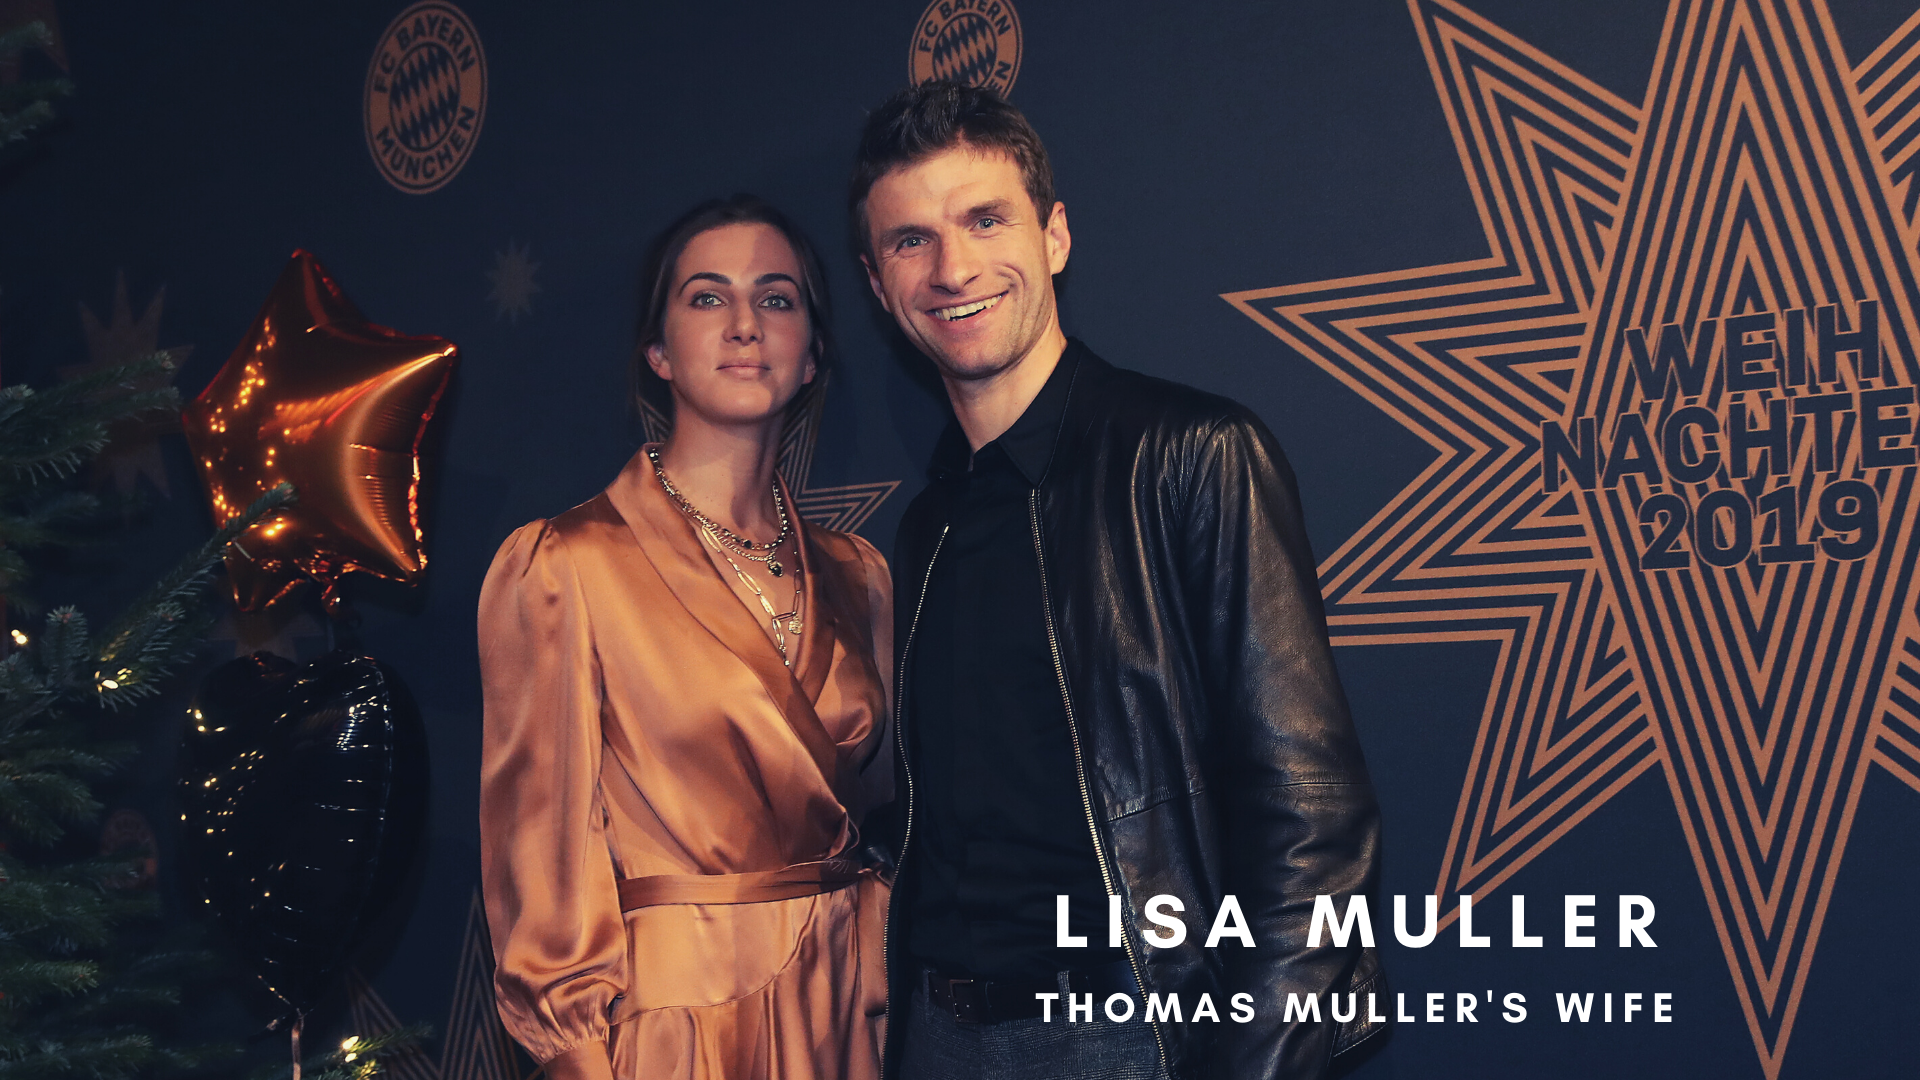 Thomas Muller Wife Lisa Muller Wiki 2022- Age, Net Worth, Career, Kids, Family and more. (Original Image by Alexander Hassenstein/Getty Images)